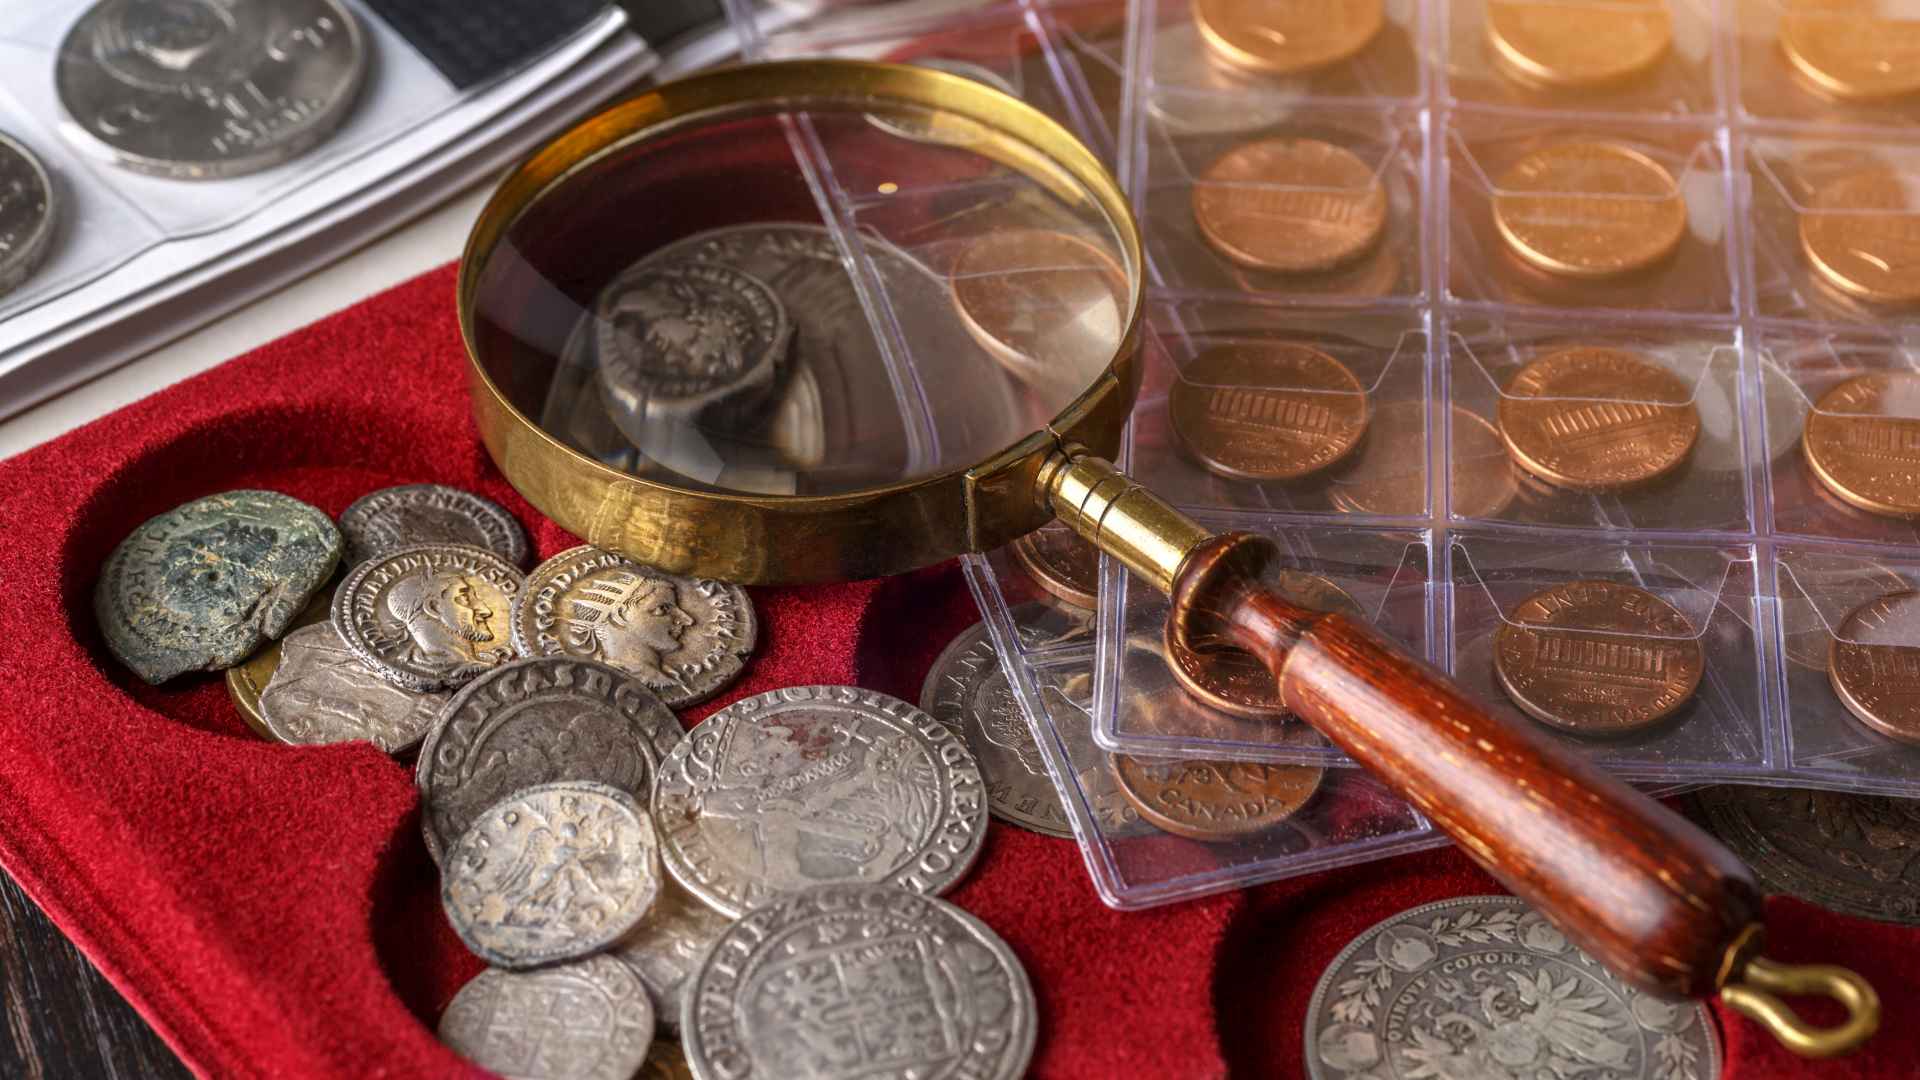 don’t do these 4 things if you find an old coin or bill worth thousands of dollars